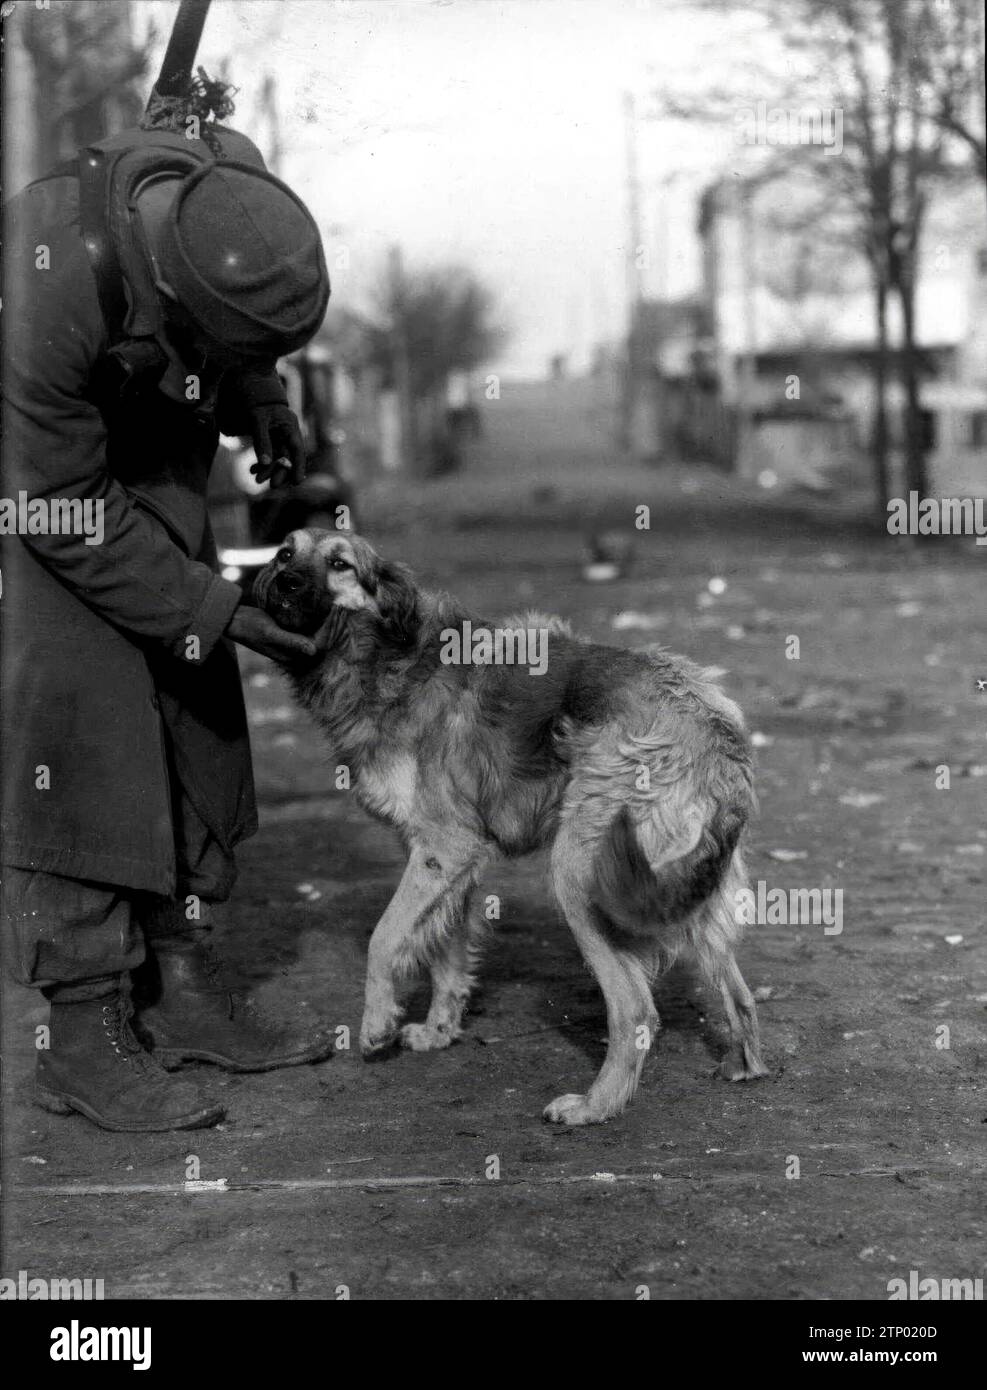 01/17/1937. 'Zagal', a pet dog, shows her wounded, almost healed paw. Credit: Album / Archivo ABC / Virgilio Muro Stock Photo